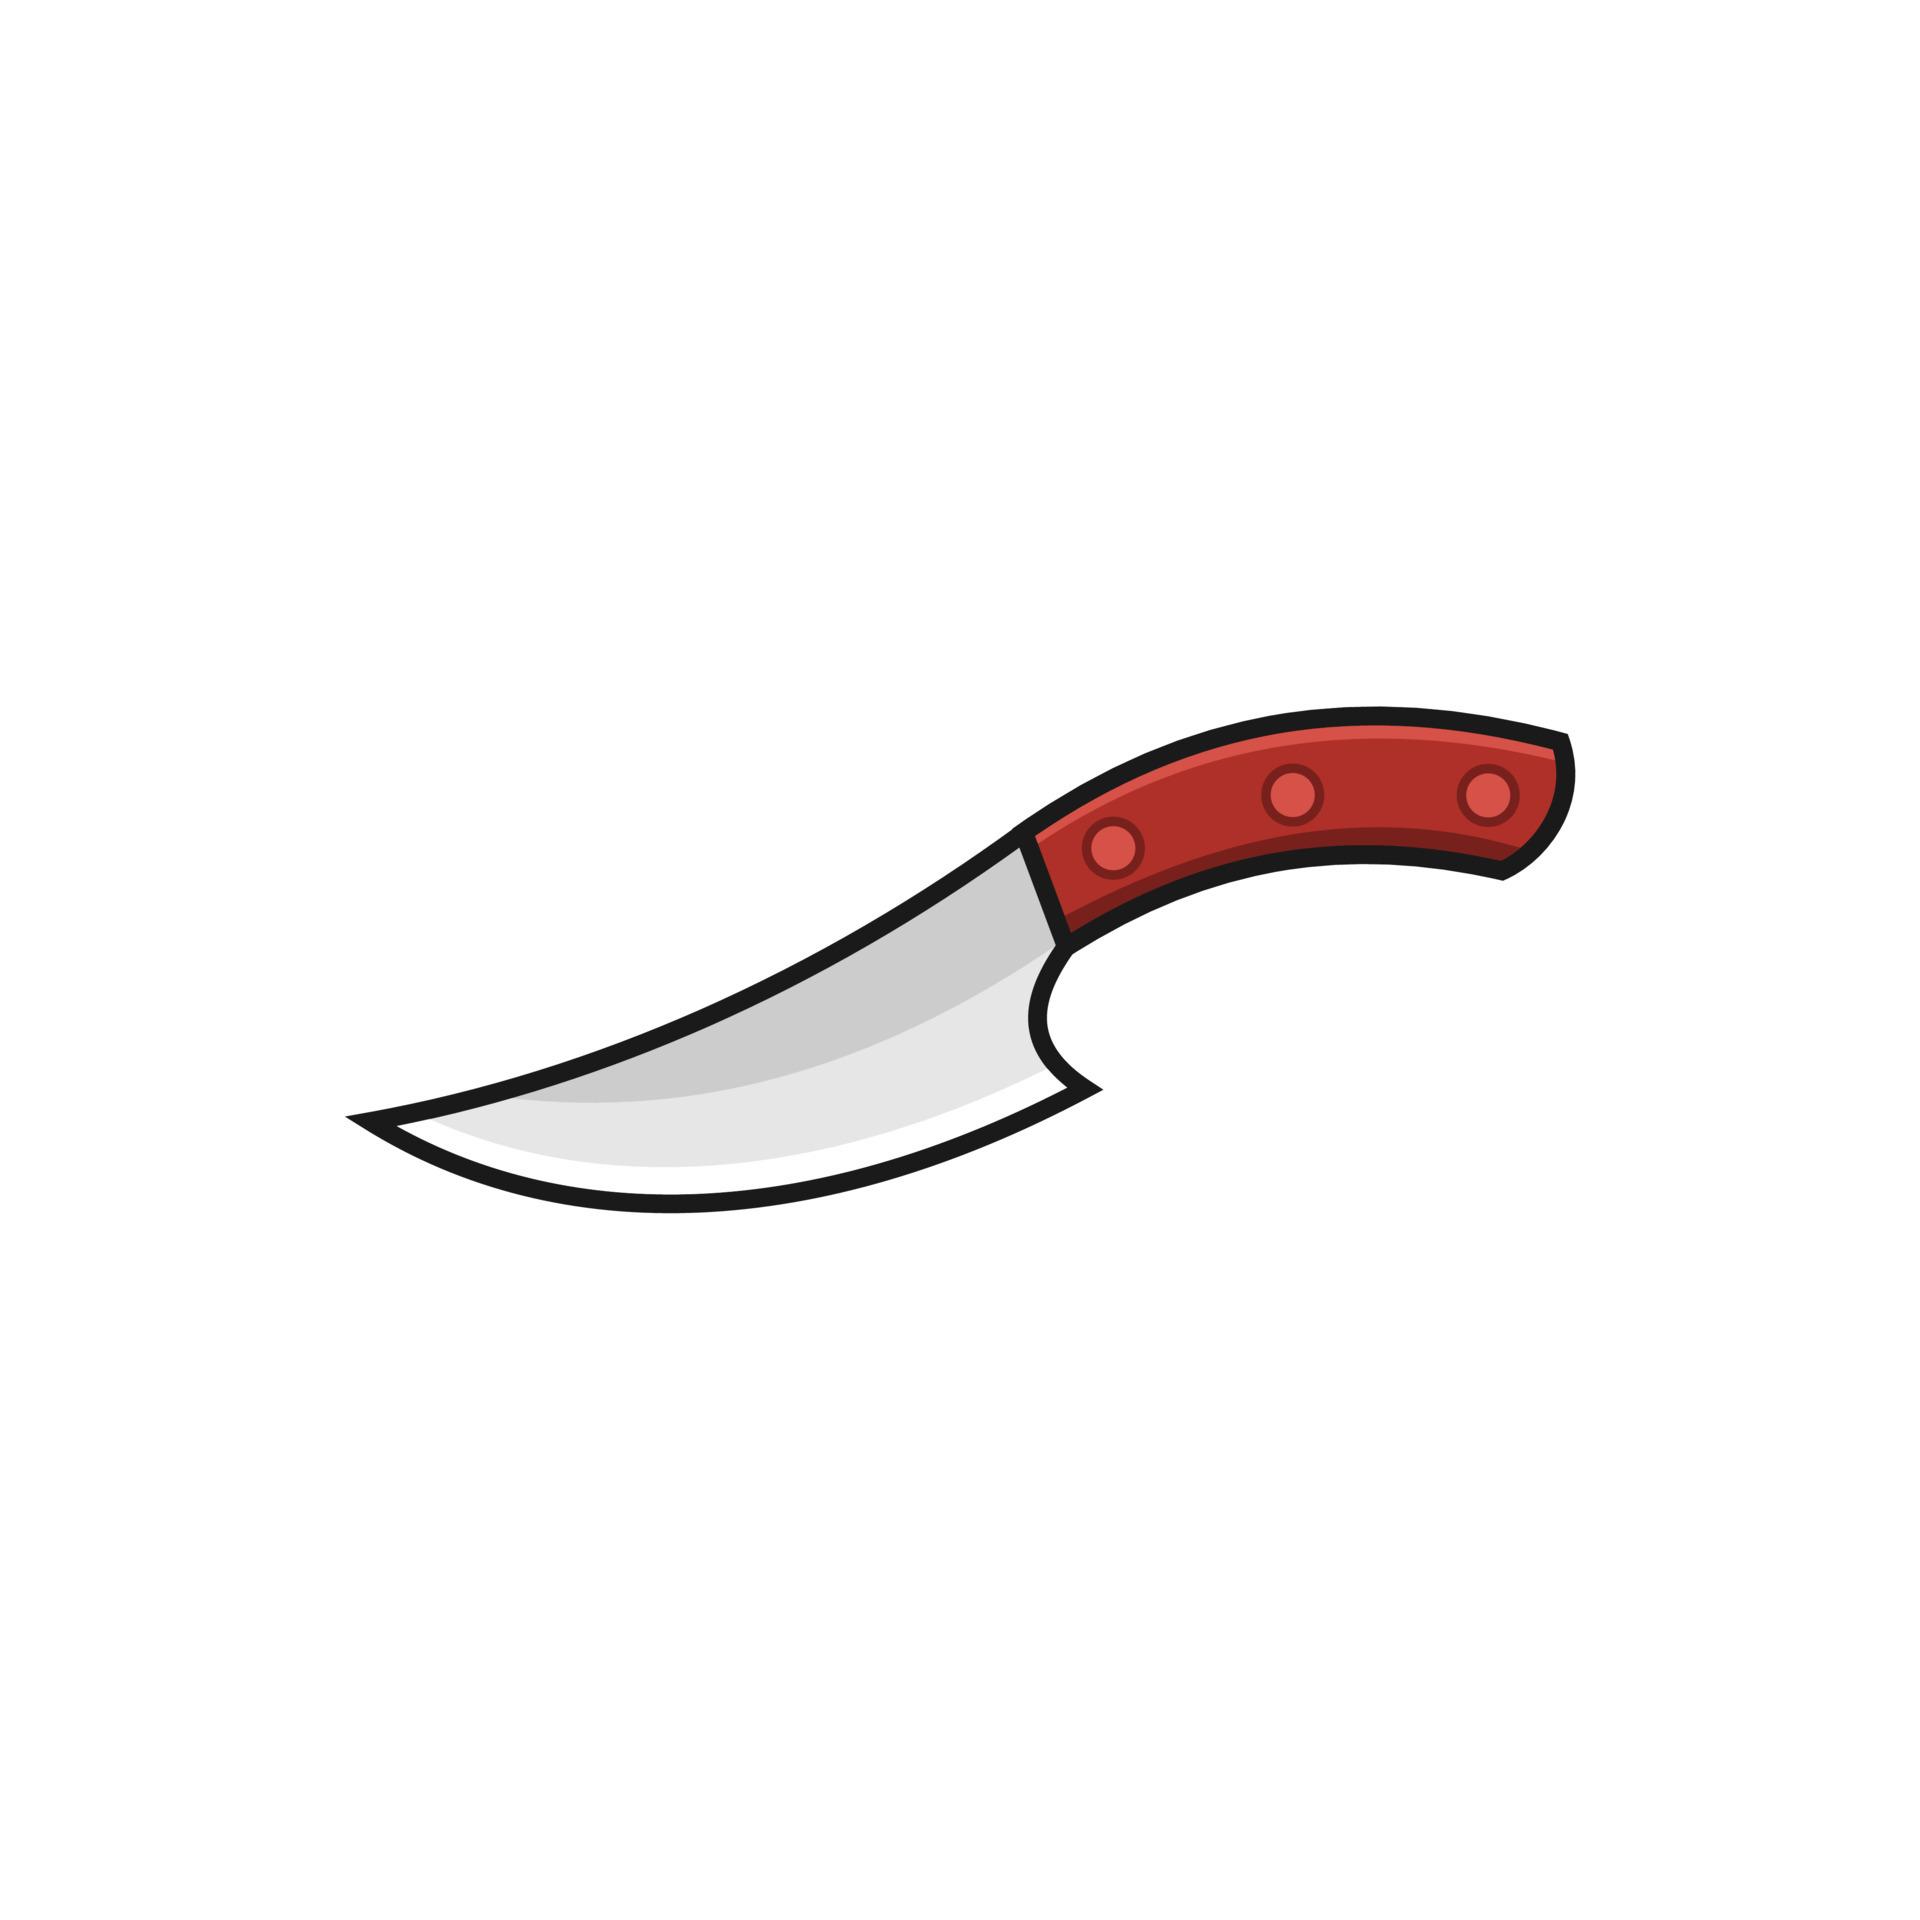 Knife icon. Cartoon illustration of knife vector icon, suitable for your  design need, logo, illustration, animation, etc. 7162614 Vector Art at  Vecteezy